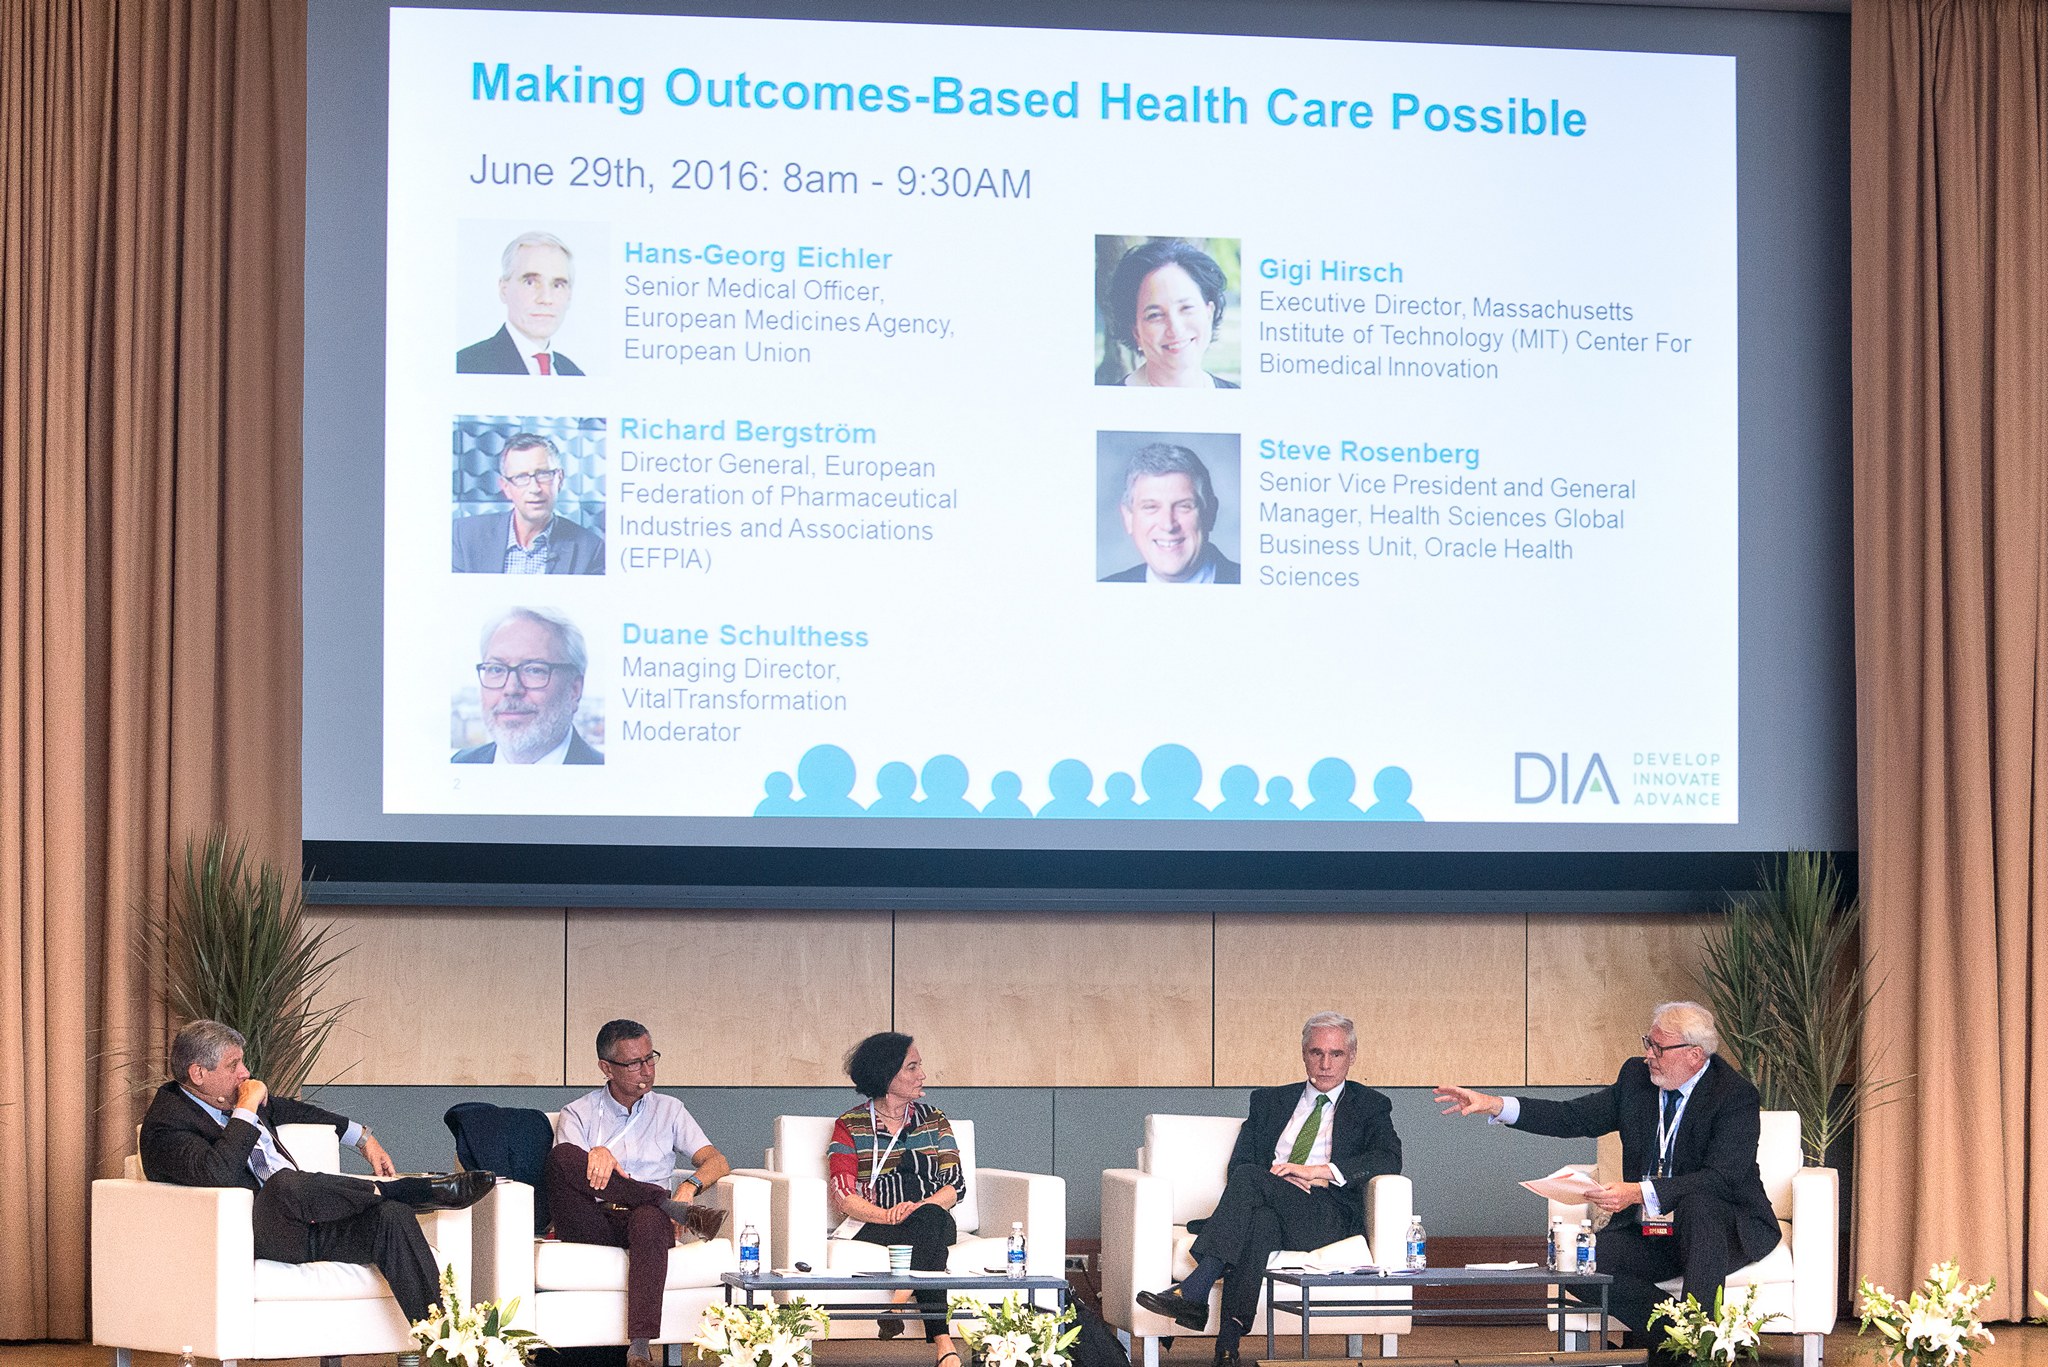 DIAmond Session 302: Europe and the US: Making Outcomes-Based Health Care Possible